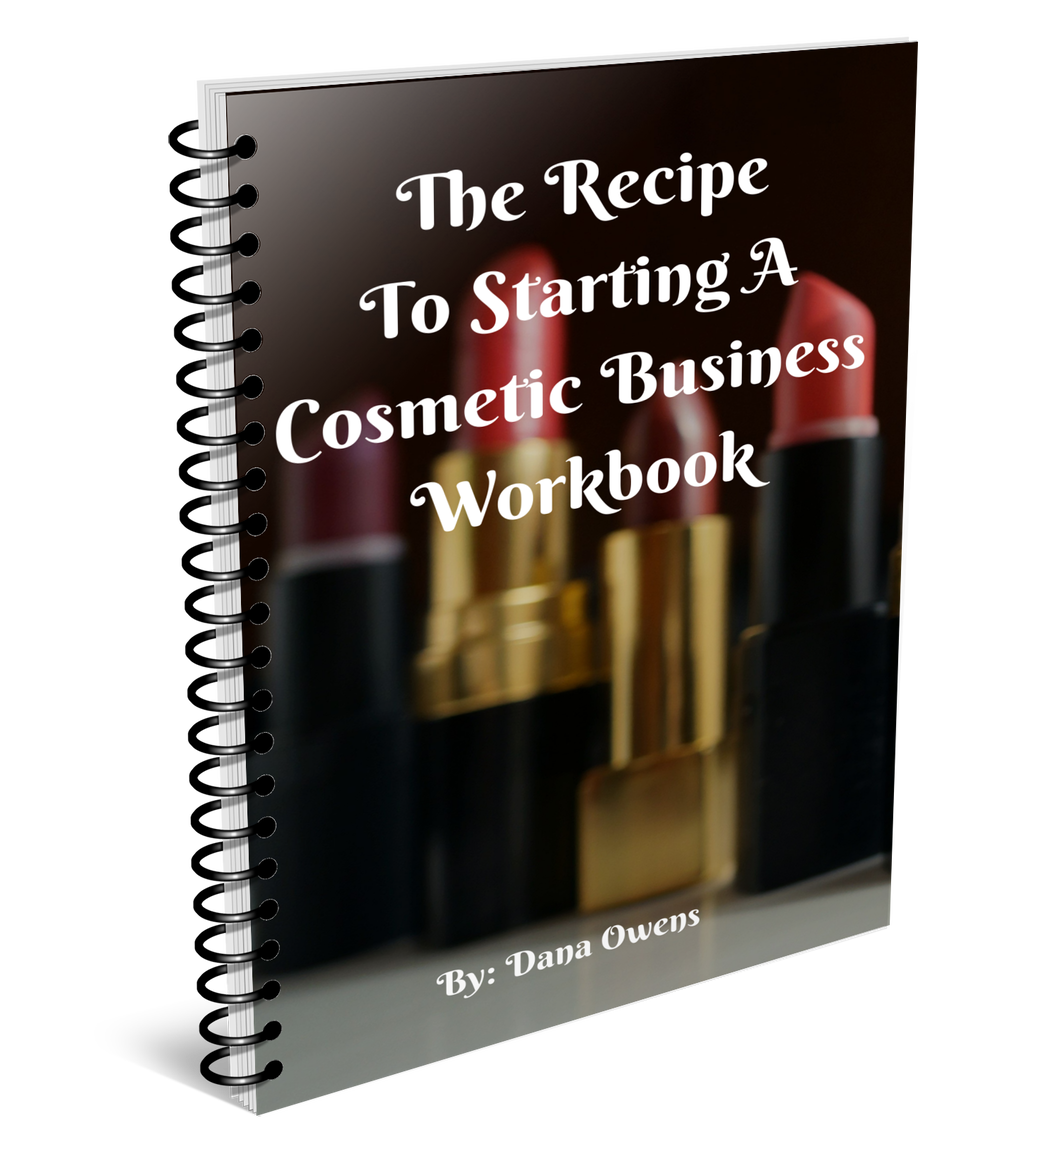 Starting a Cosmetic Business Workbook(Hard Copy)